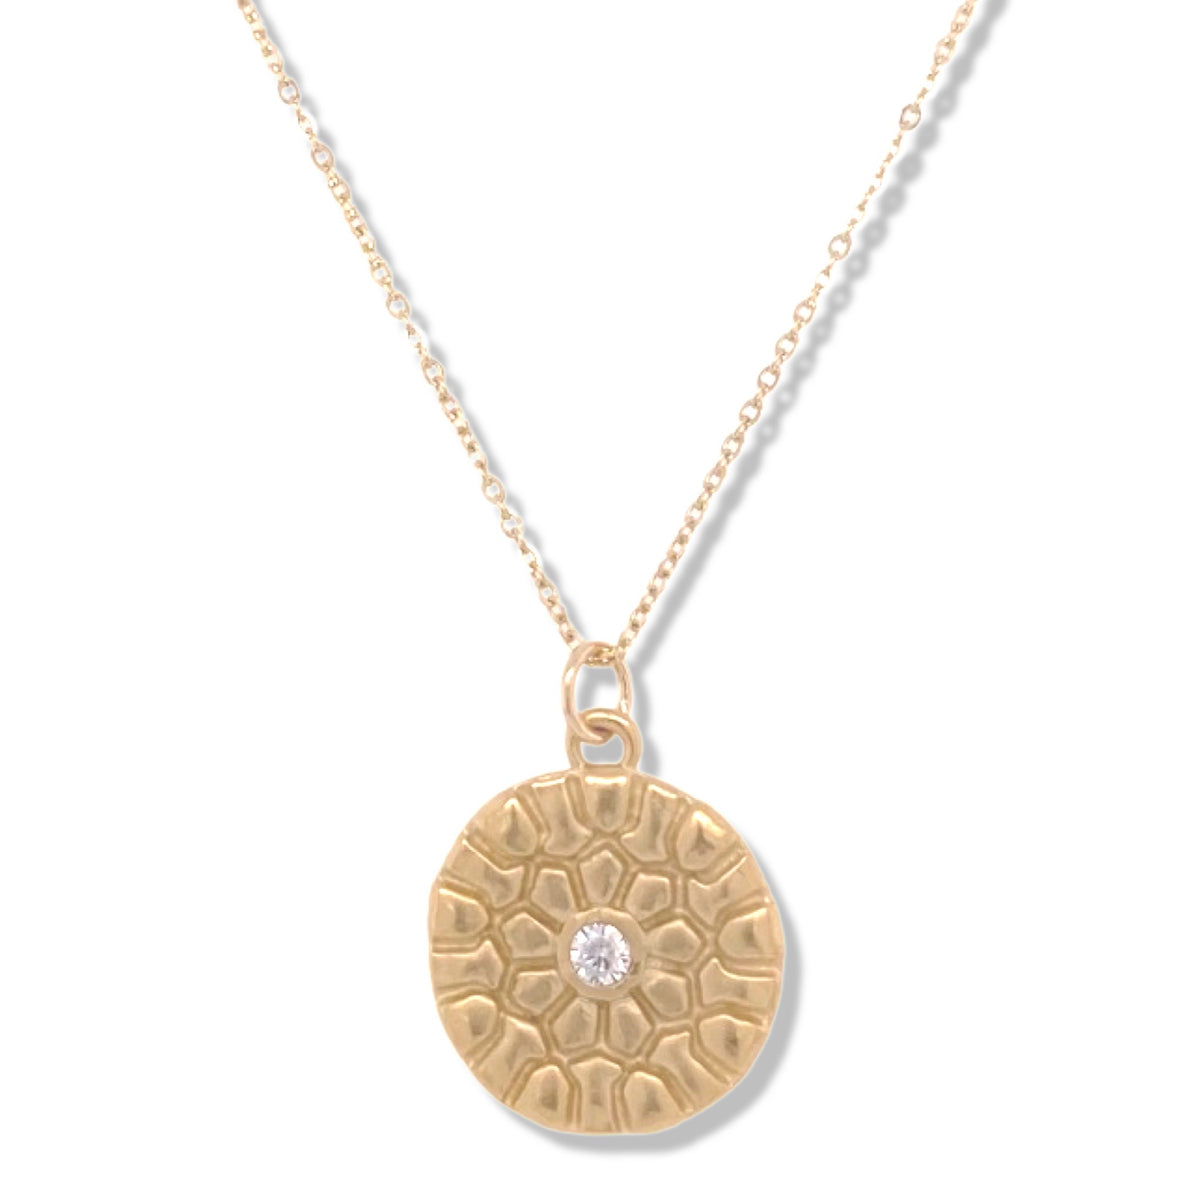 Essa Necklace in Gold | Keely Smith Jewelry | Nantucket